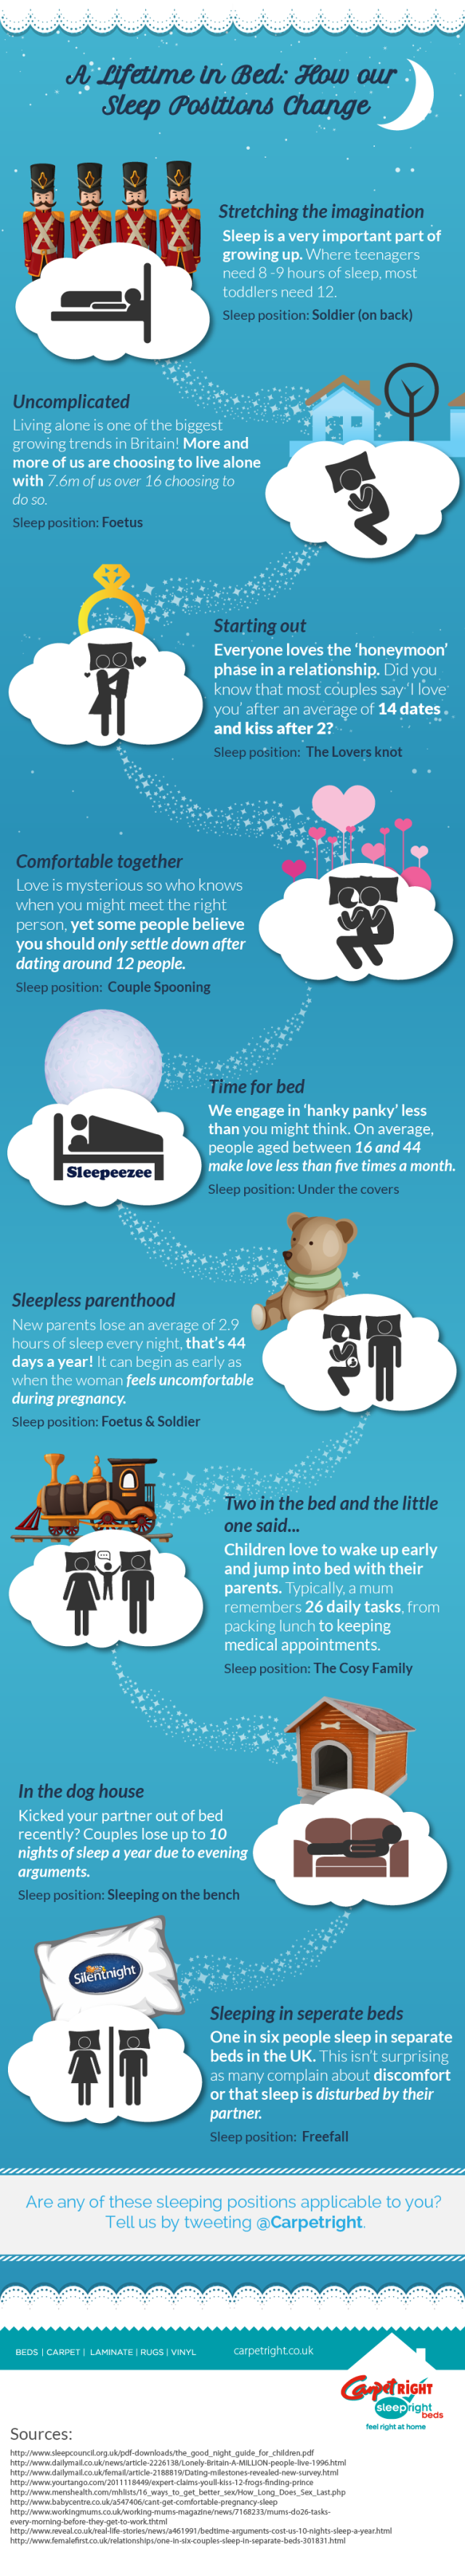 lifetime-in-bed-how-our-sleep-positions-infographic A Passion for Homes